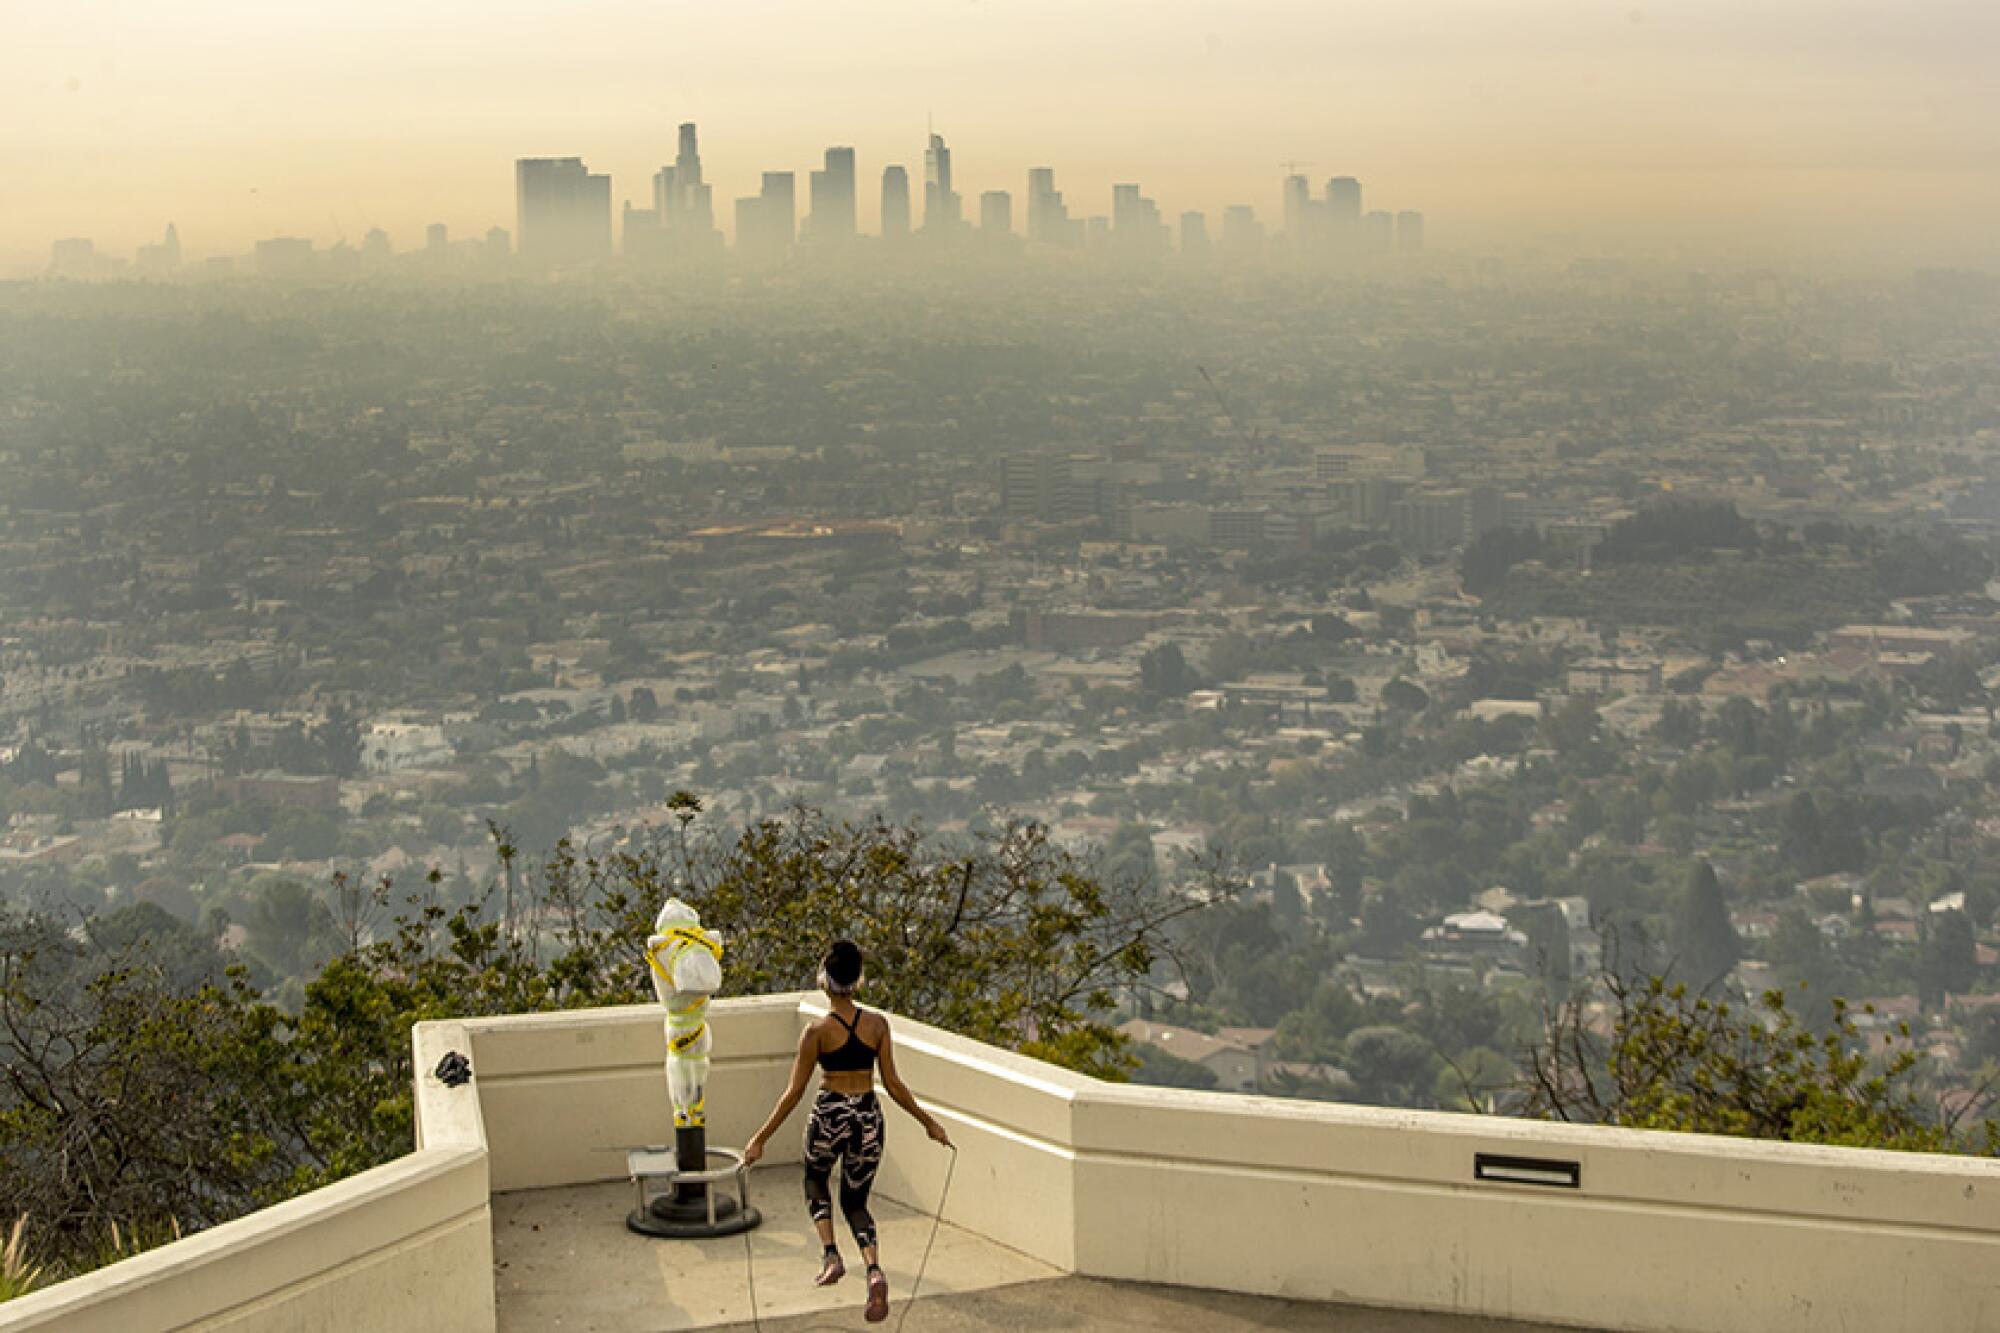 Wildfire smoke obscures a city skyline as a woman jumps rope in the foreground.